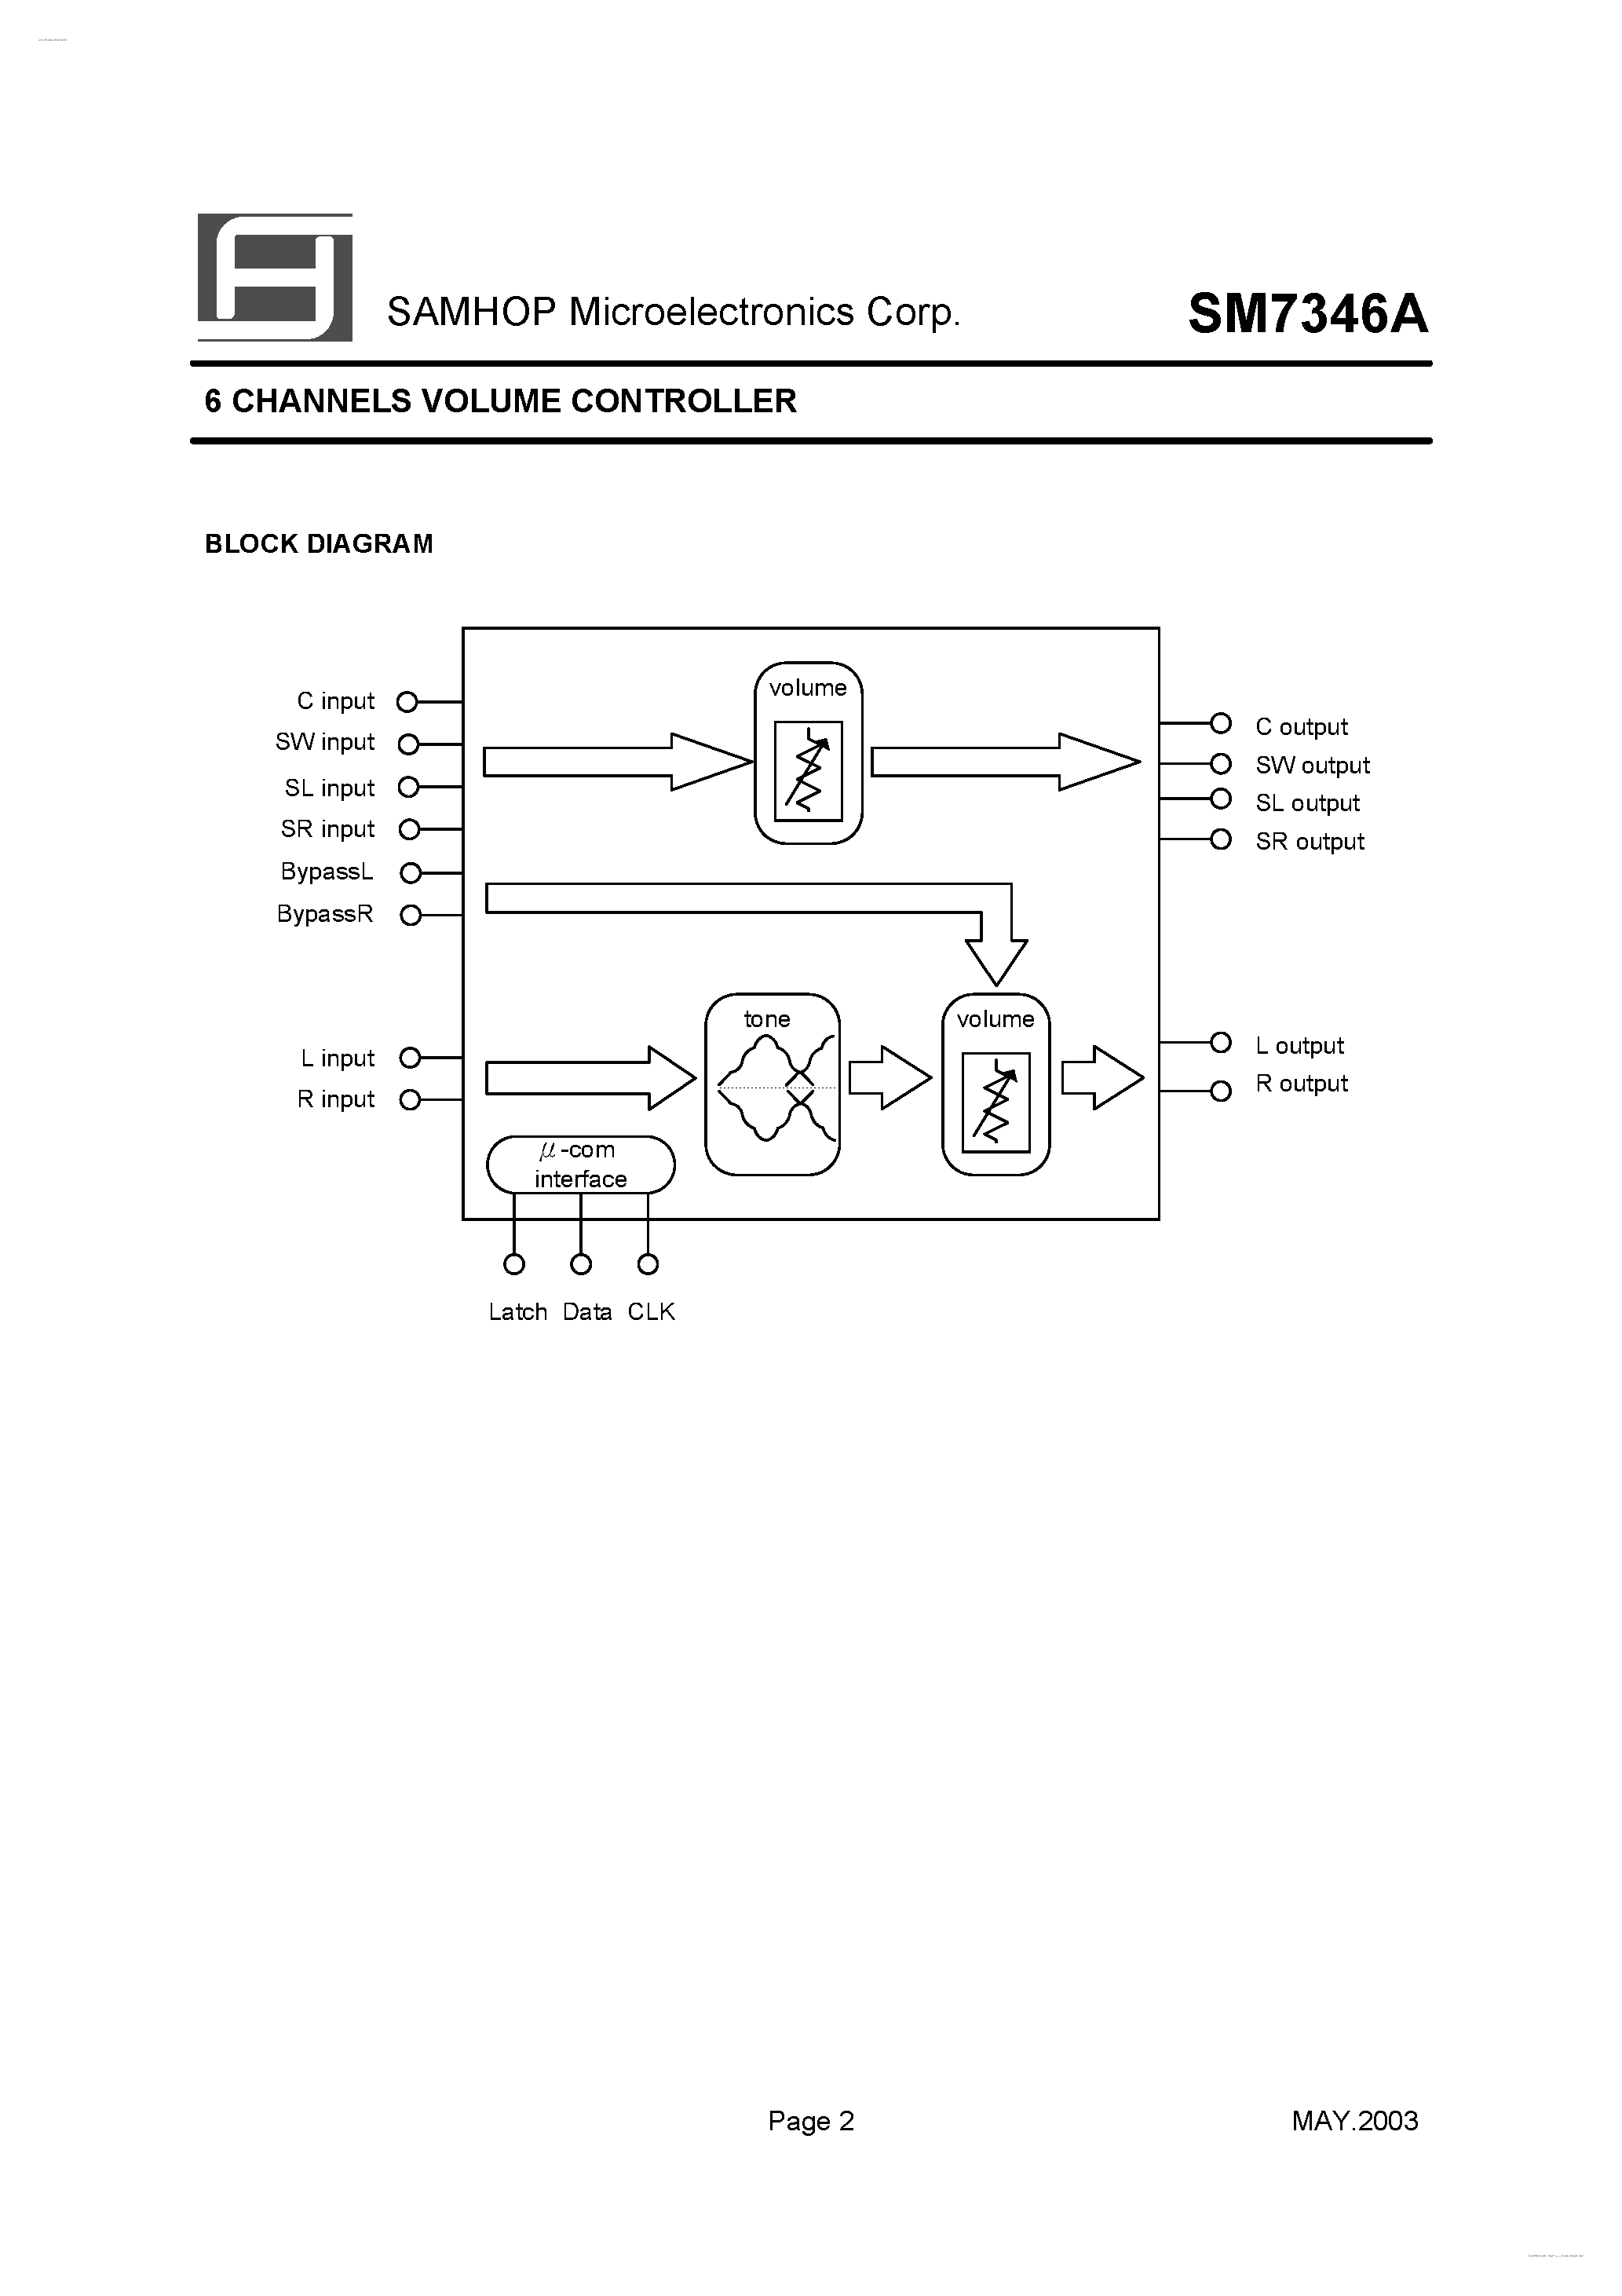 Datasheet SM7346A - 6 CHANNELS VOLUME CONTROLLER page 2